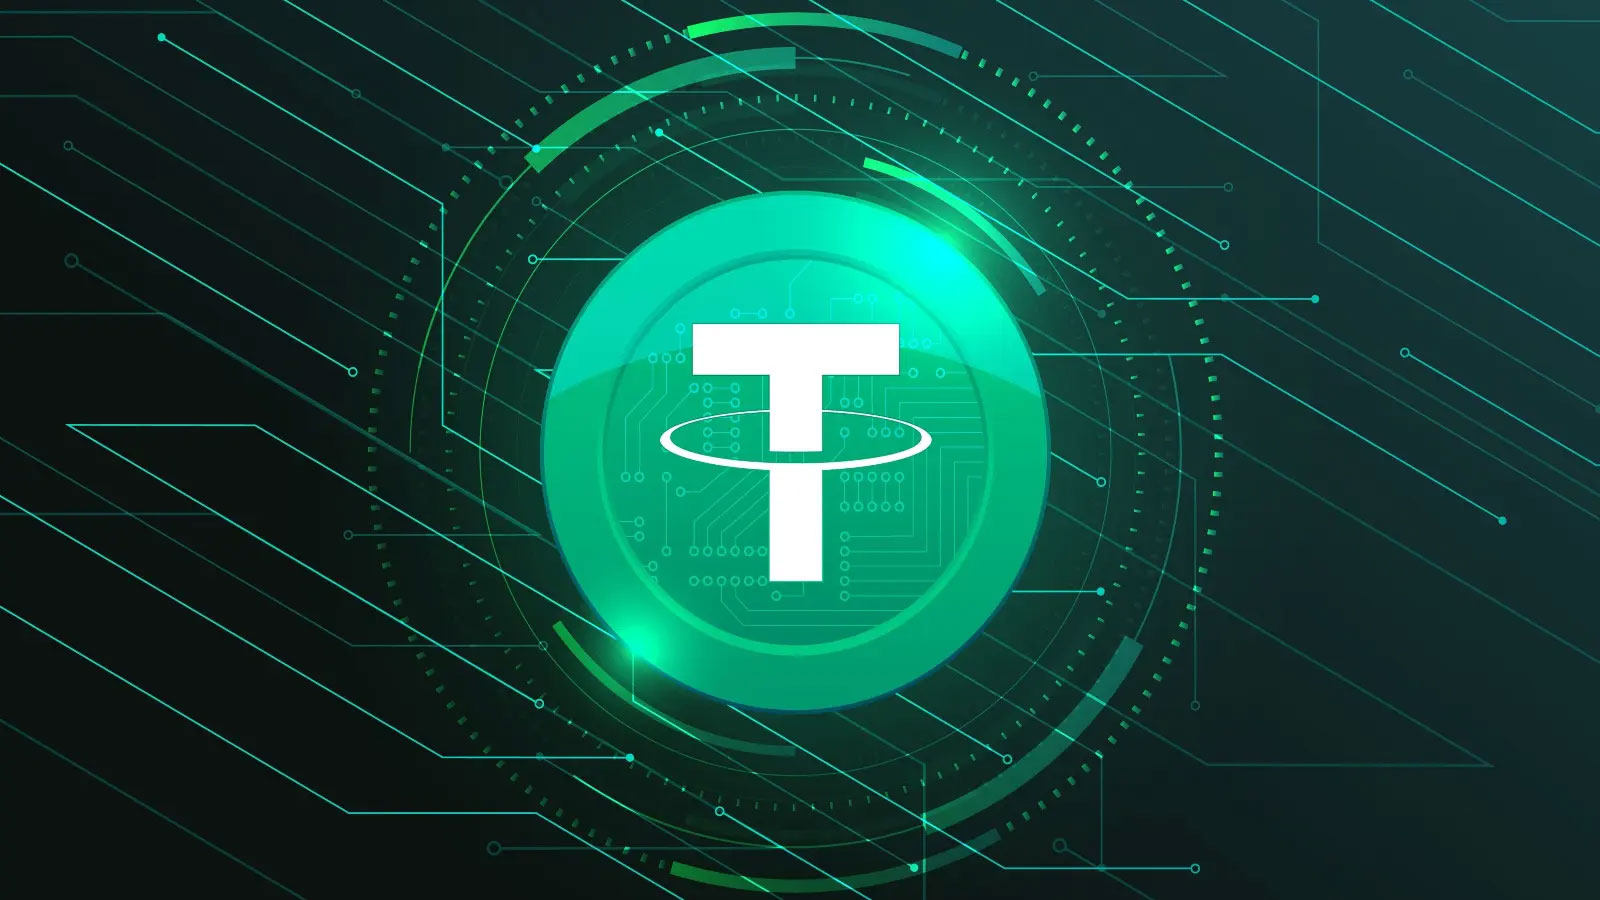 Tether is gaining momentum against competing stablecoins, says Tether CTO